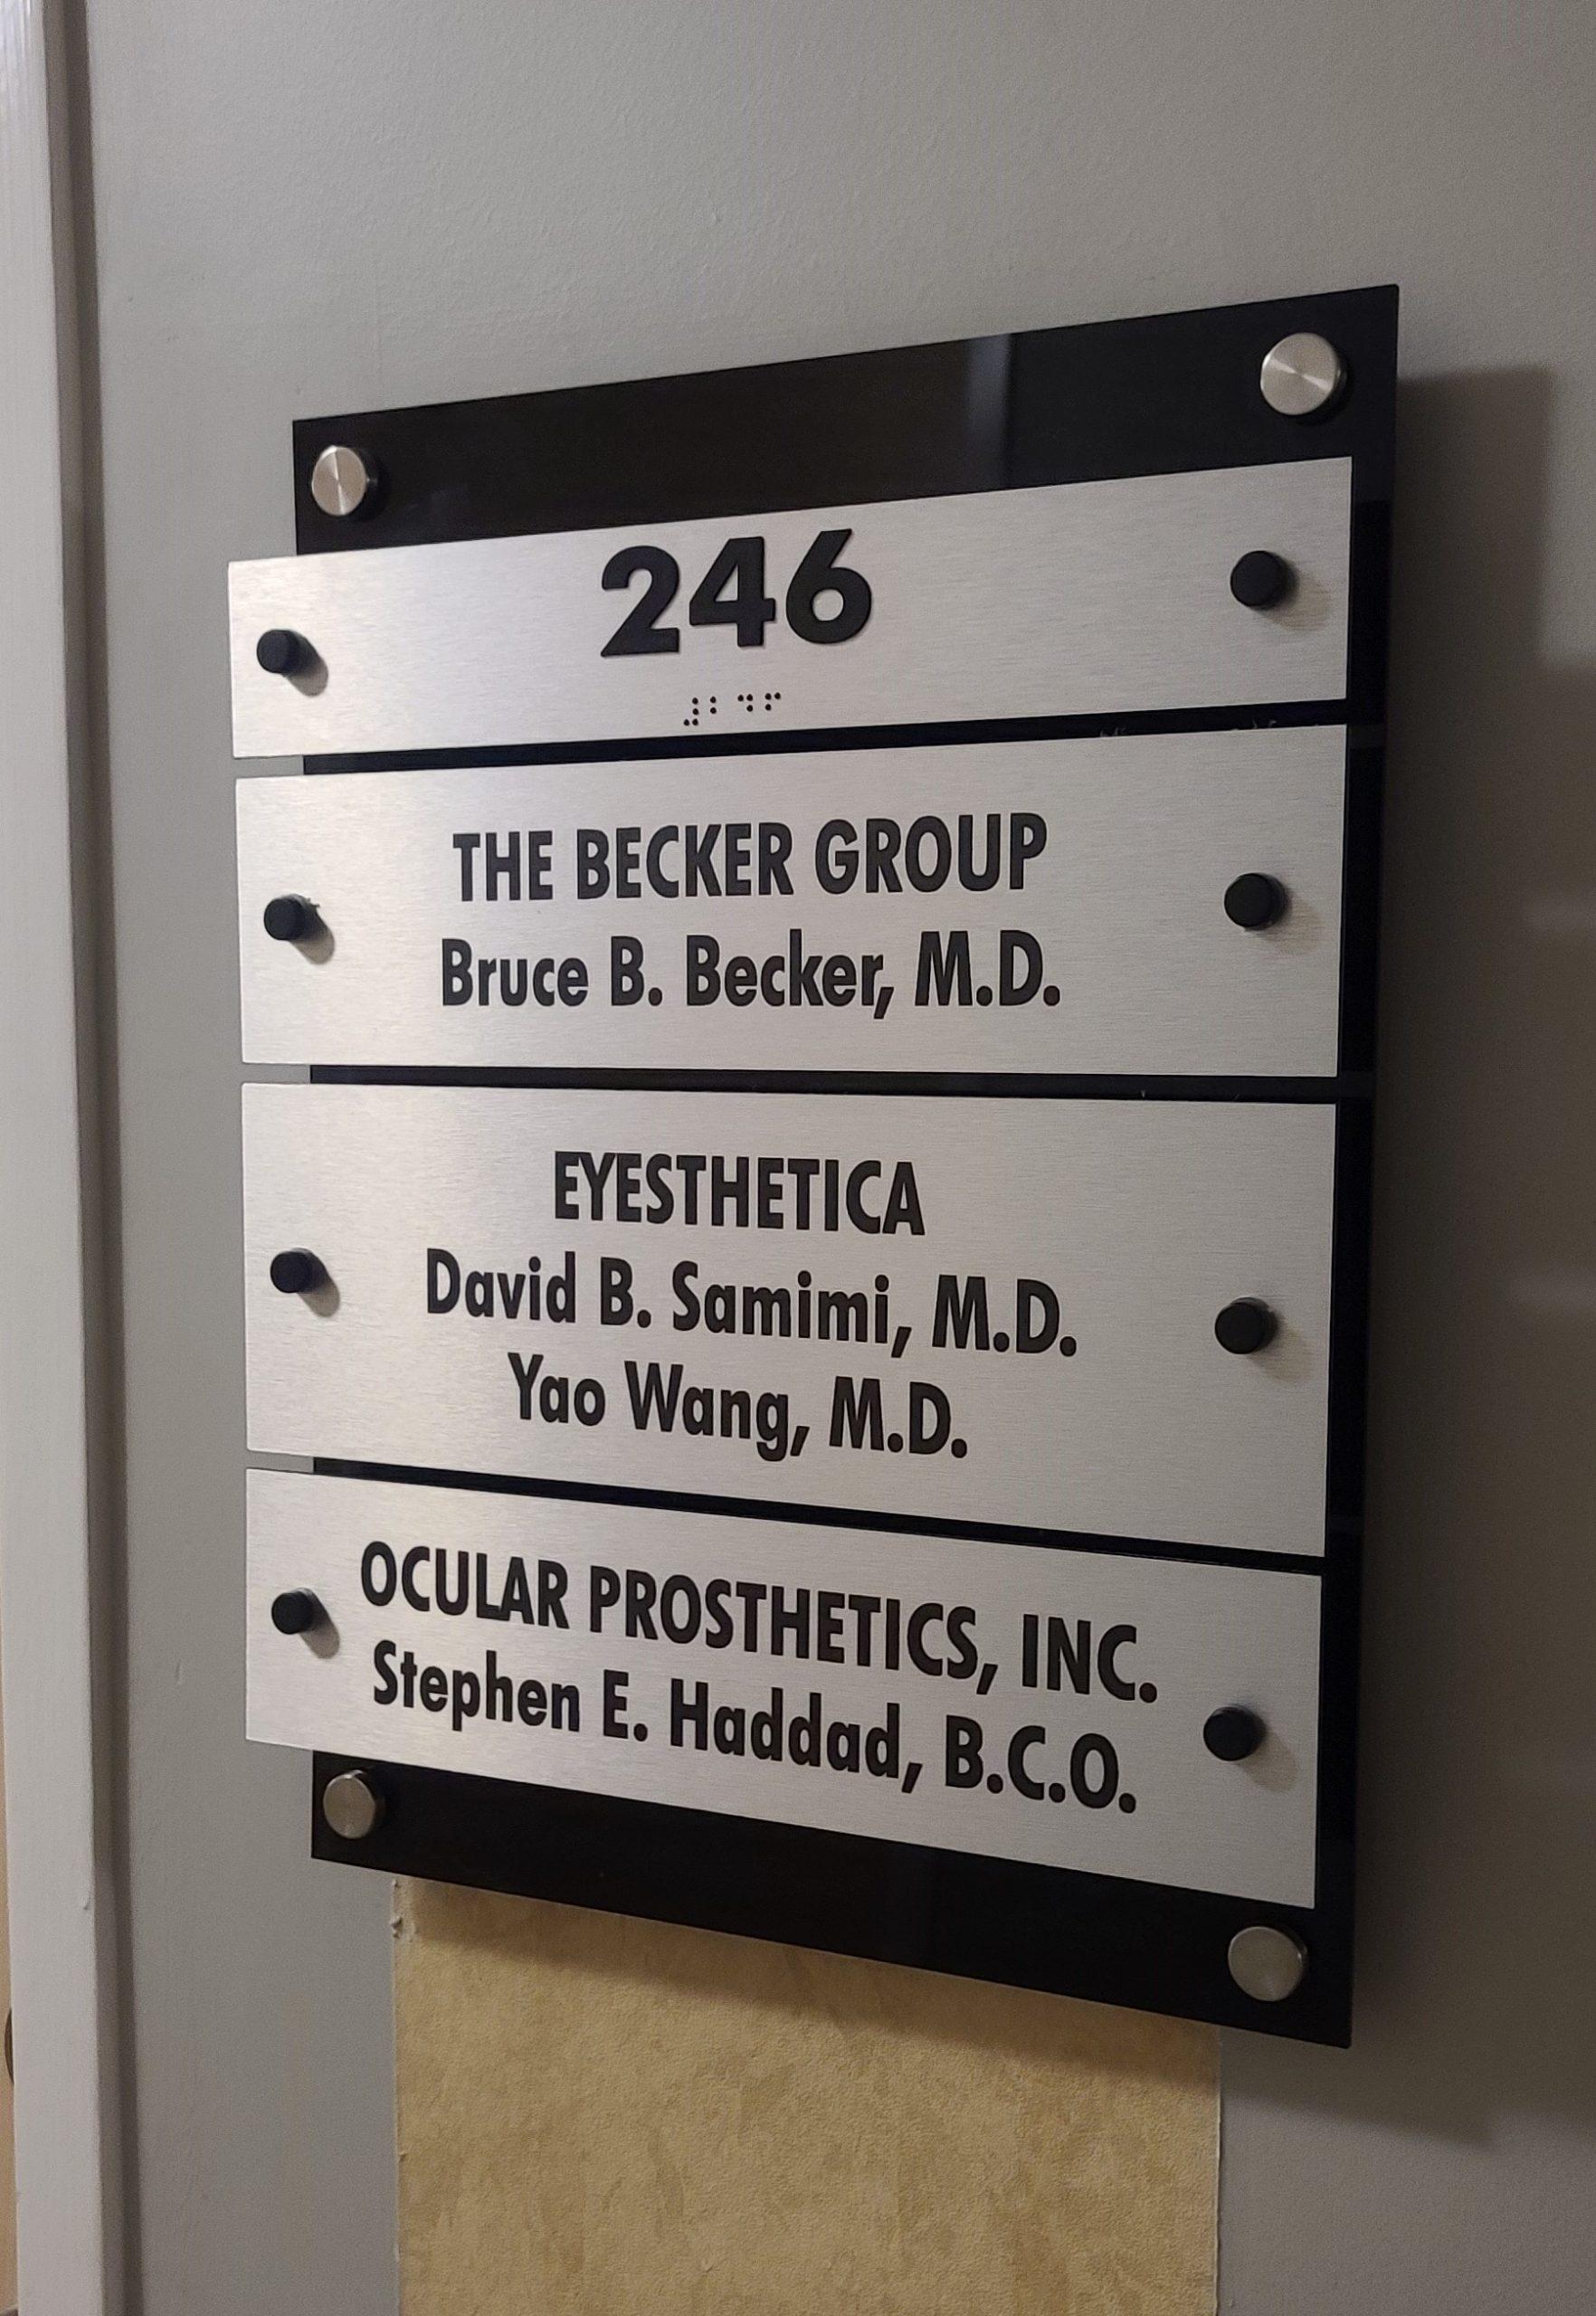 This is a suite plaque or room sign for the Becker Group in Ethan Christopher's West Hollywood building. Contact Premium Sign Solutions. Los Angeles sign company serving San Fernando Valley, Tarzana, Pomona and all of Southern California. Premium Sign Solutions Specializing in Storefront Signs, Lobby Signs, Indoor Signs and Outdoor Signs for Businesses.